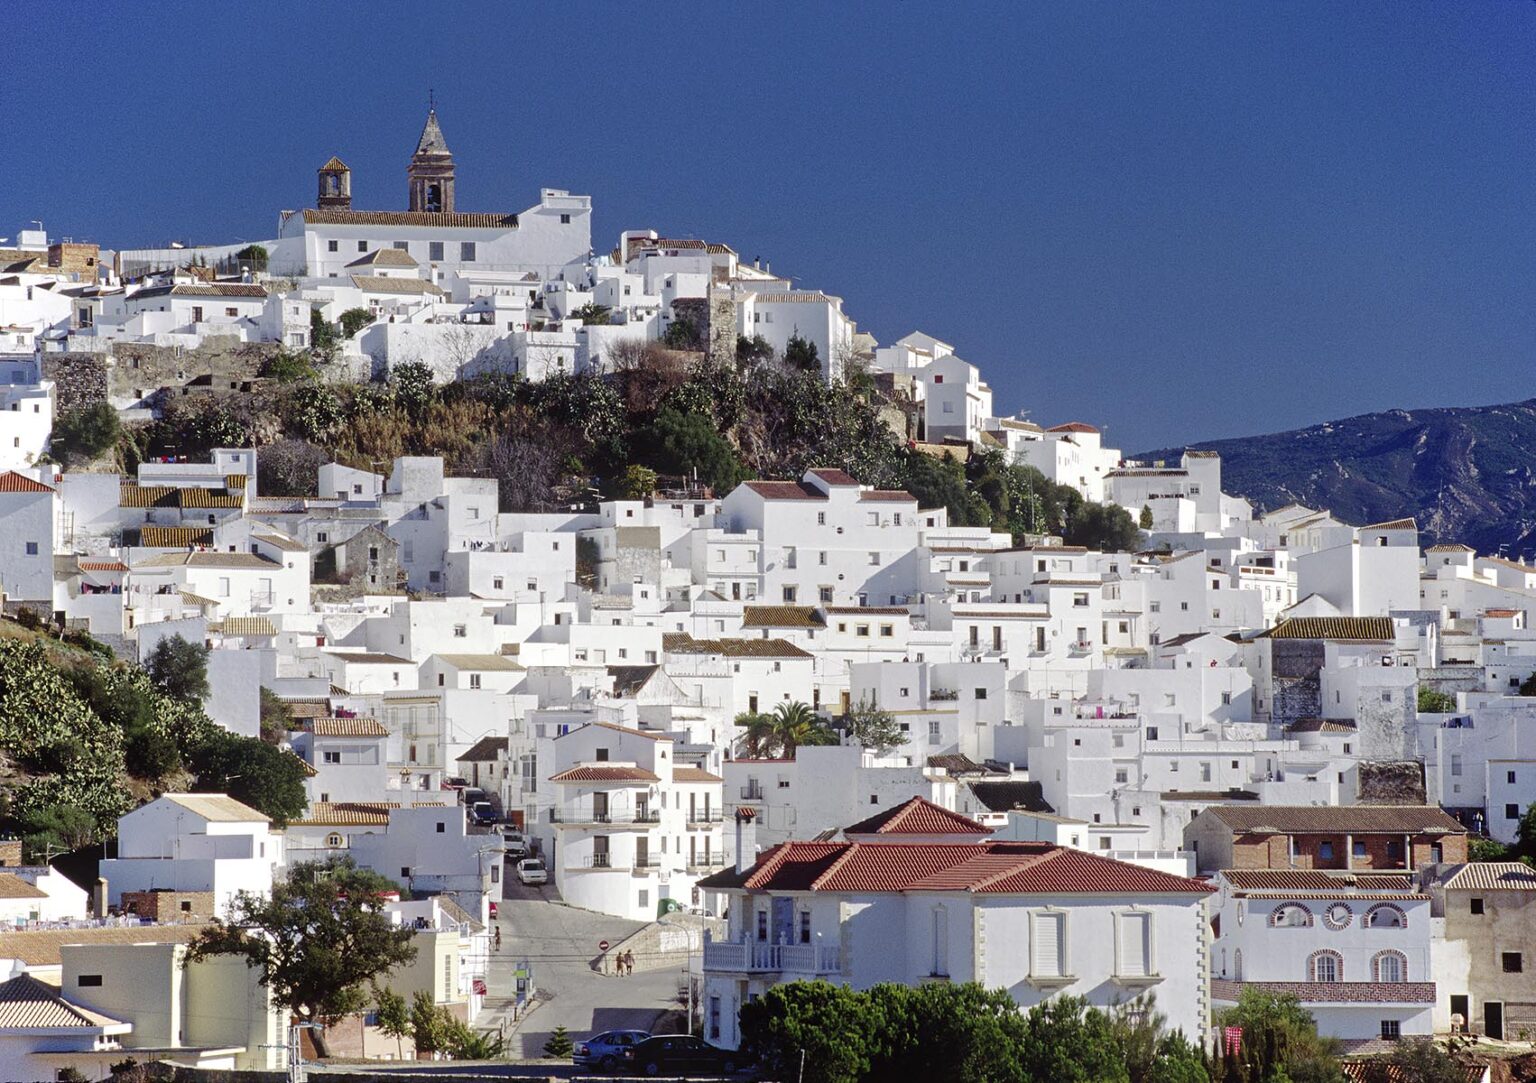 The sparkling white washed town of ALCALA DE GAZULES in central SPAIN